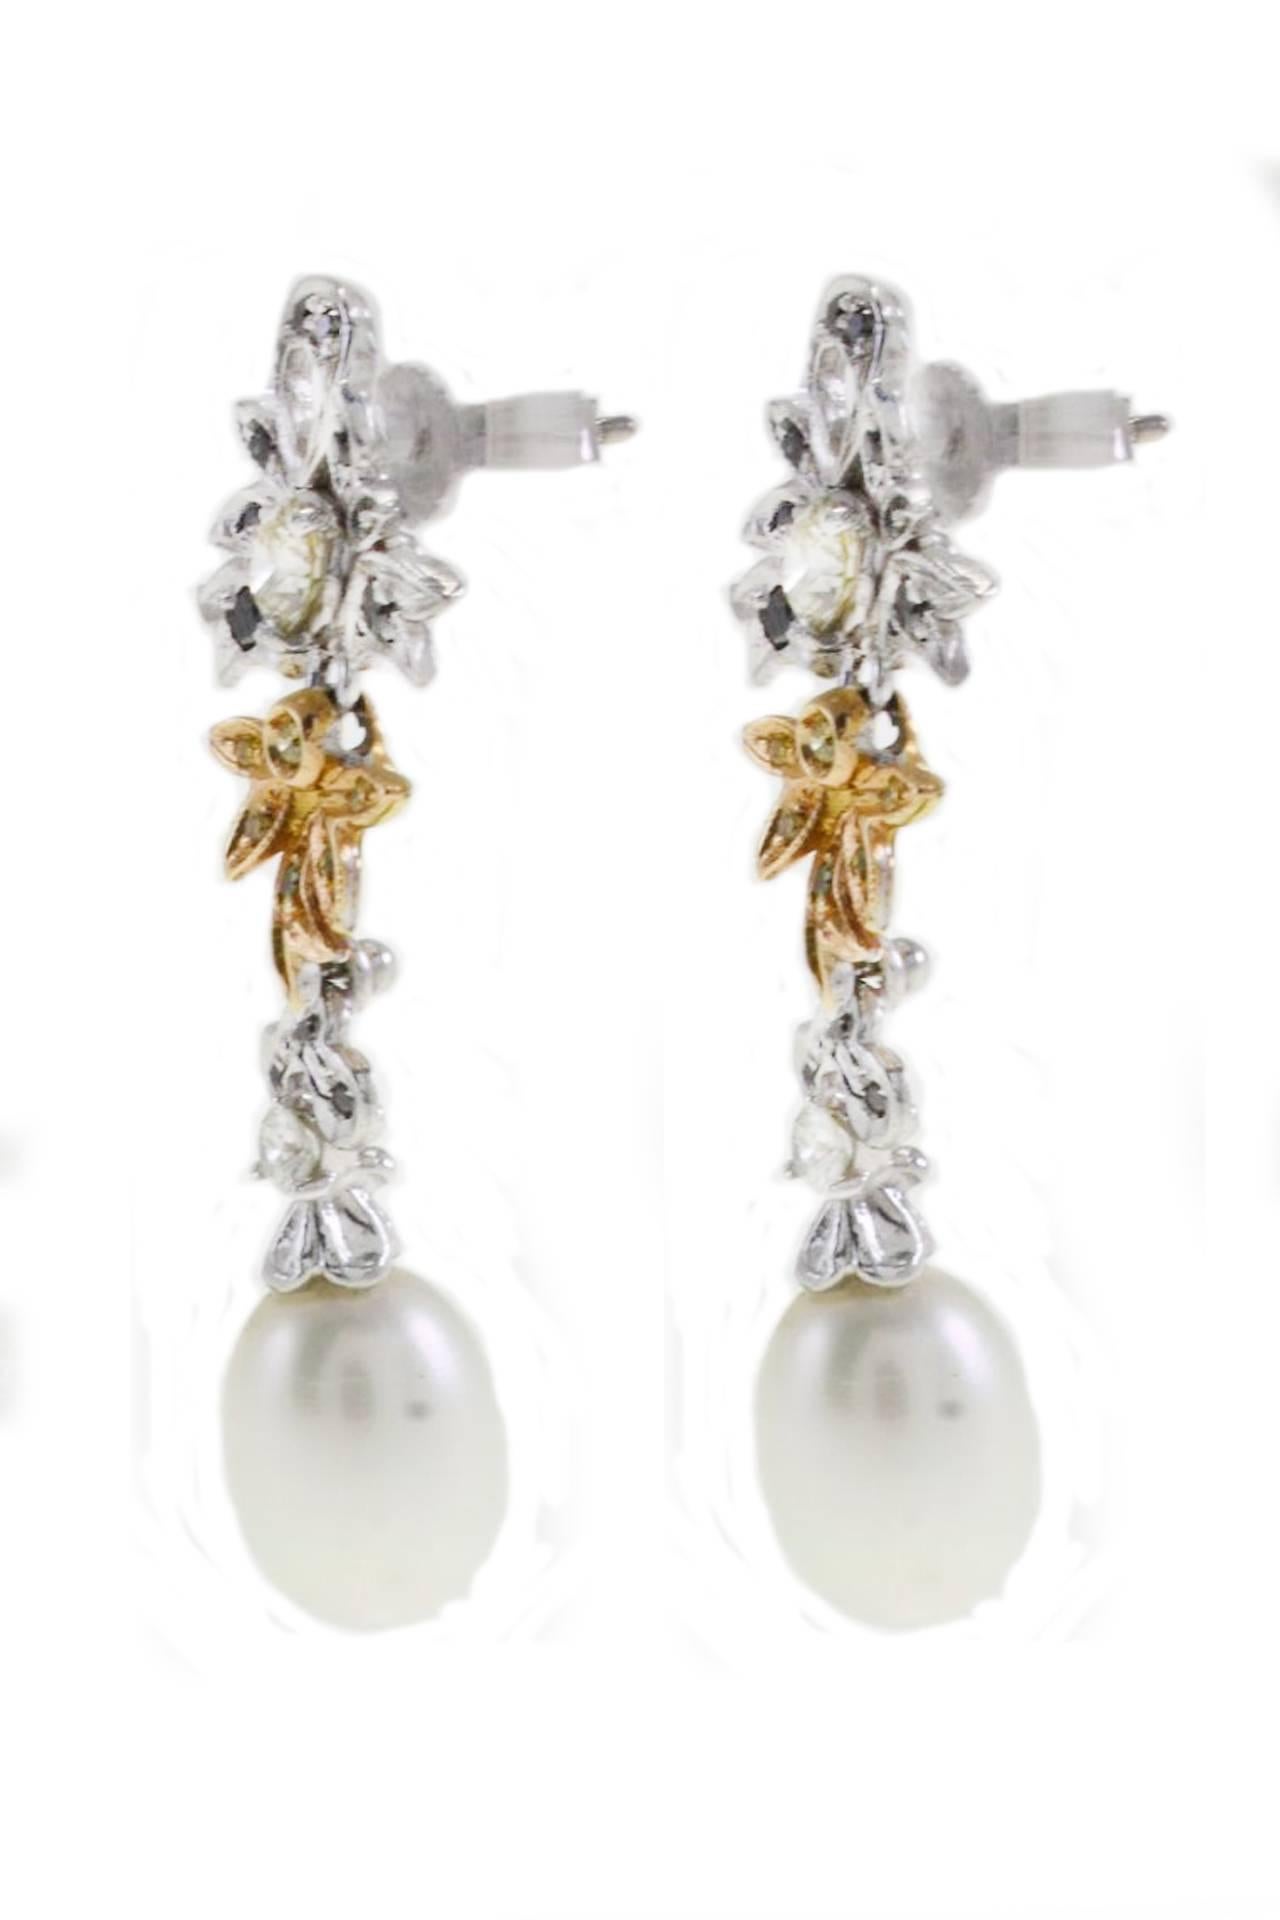 Dangle earrings in 14Kt white gold and yellow gold composed of blue, yellow and white diamonds on the top of a pearl drop .
diamonds(1.54Kt) 
pearl ( 2.88gr) 
Width 0.63 inch
Length 1.73 inch
tot weight 8.7gr
R.F grac

shipping policy: 
No